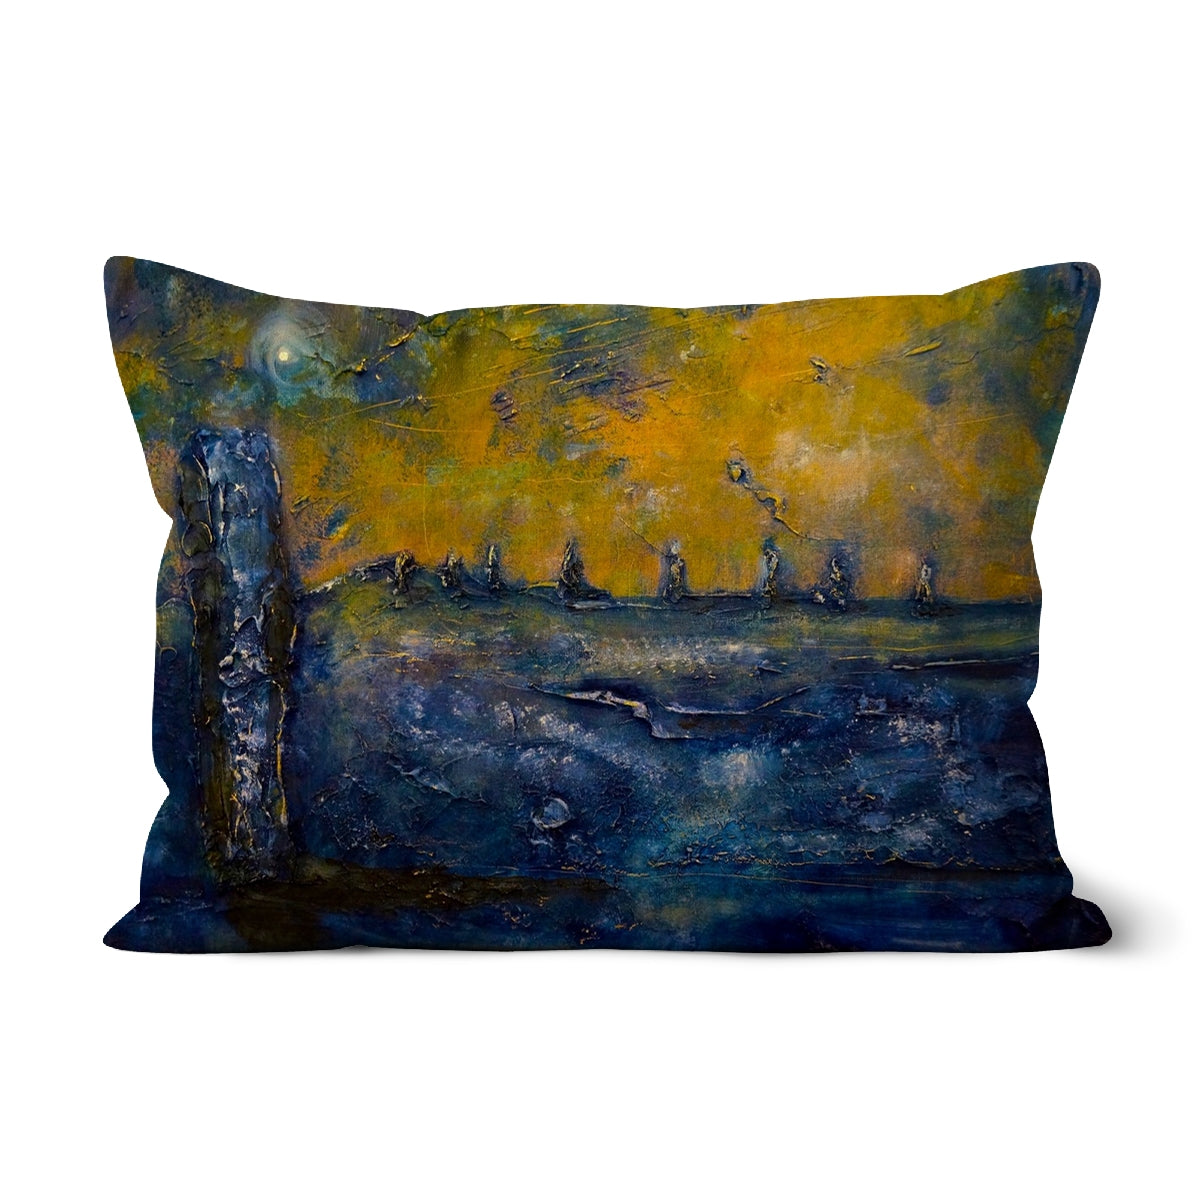 Brodgar Moonlight Orkney Art Gifts Cushion-Cushions-Orkney Art Gallery-Linen-19"x13"-Paintings, Prints, Homeware, Art Gifts From Scotland By Scottish Artist Kevin Hunter